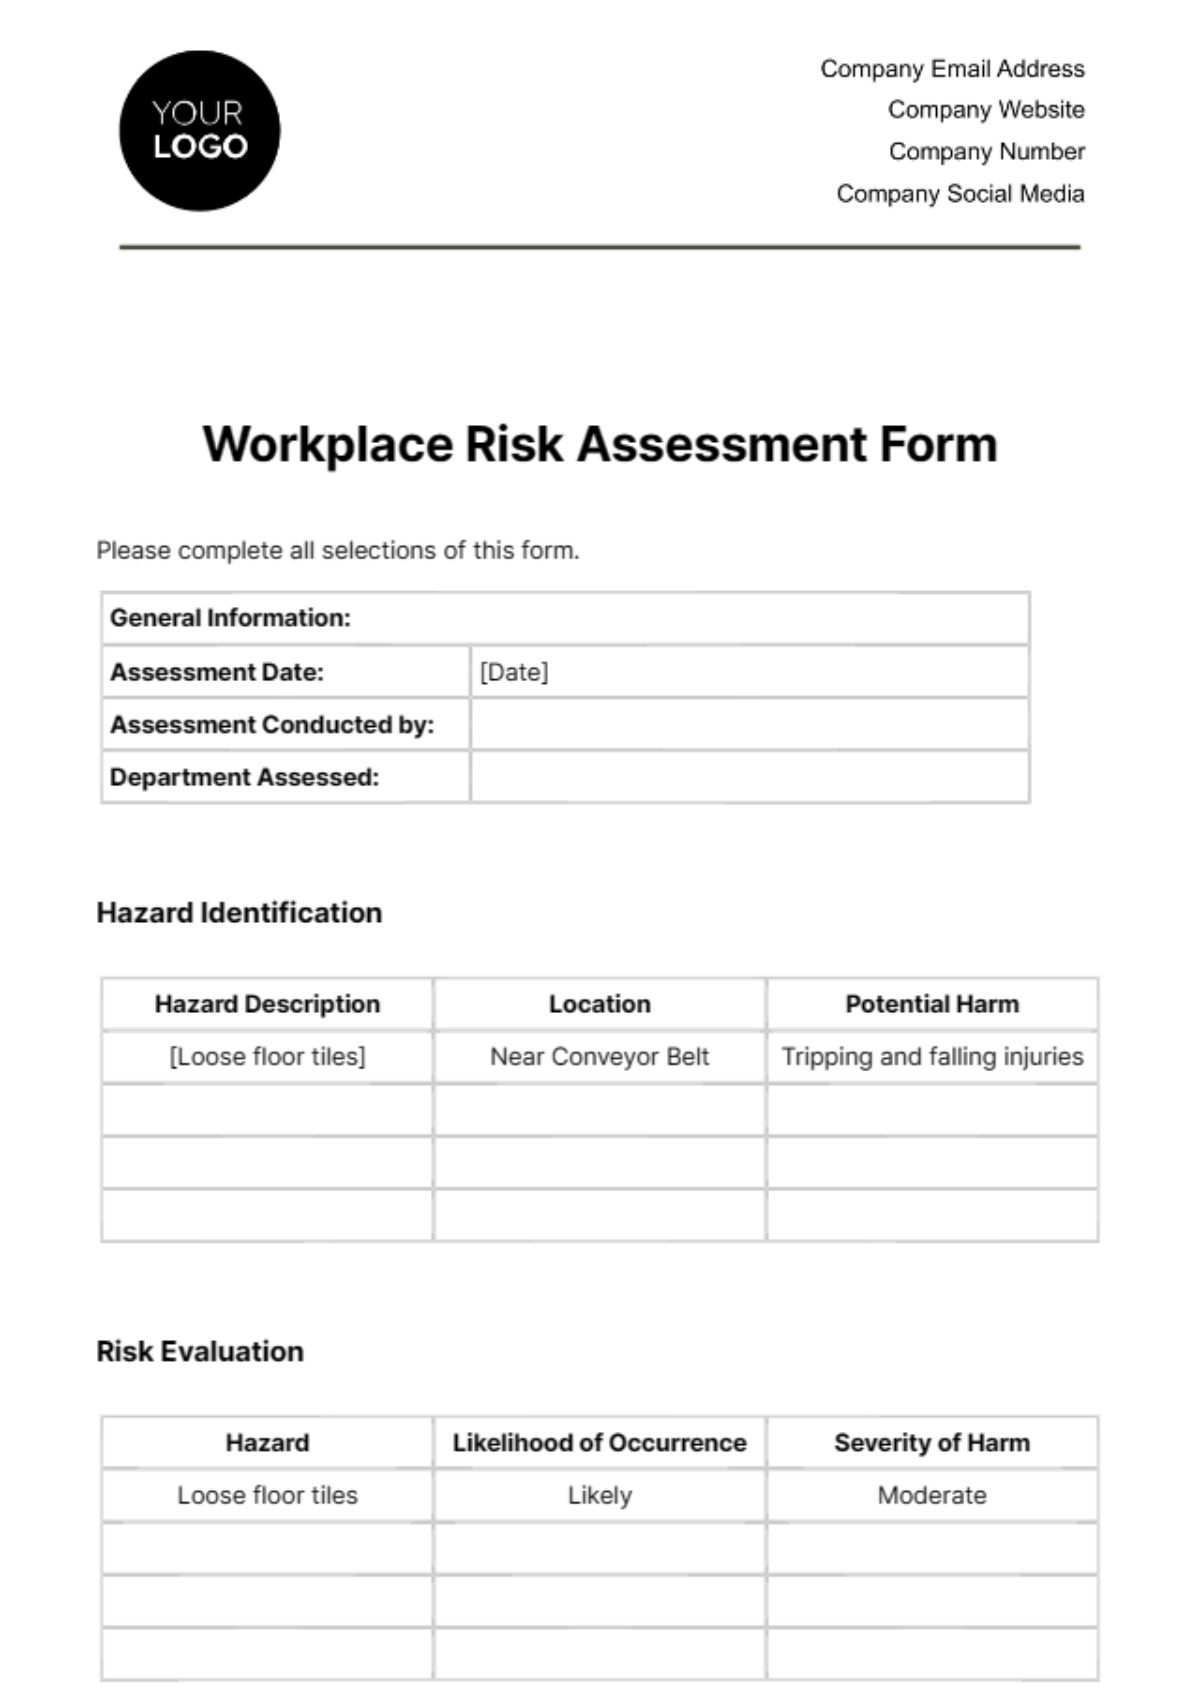 Workplace Risk Assessment Form Template